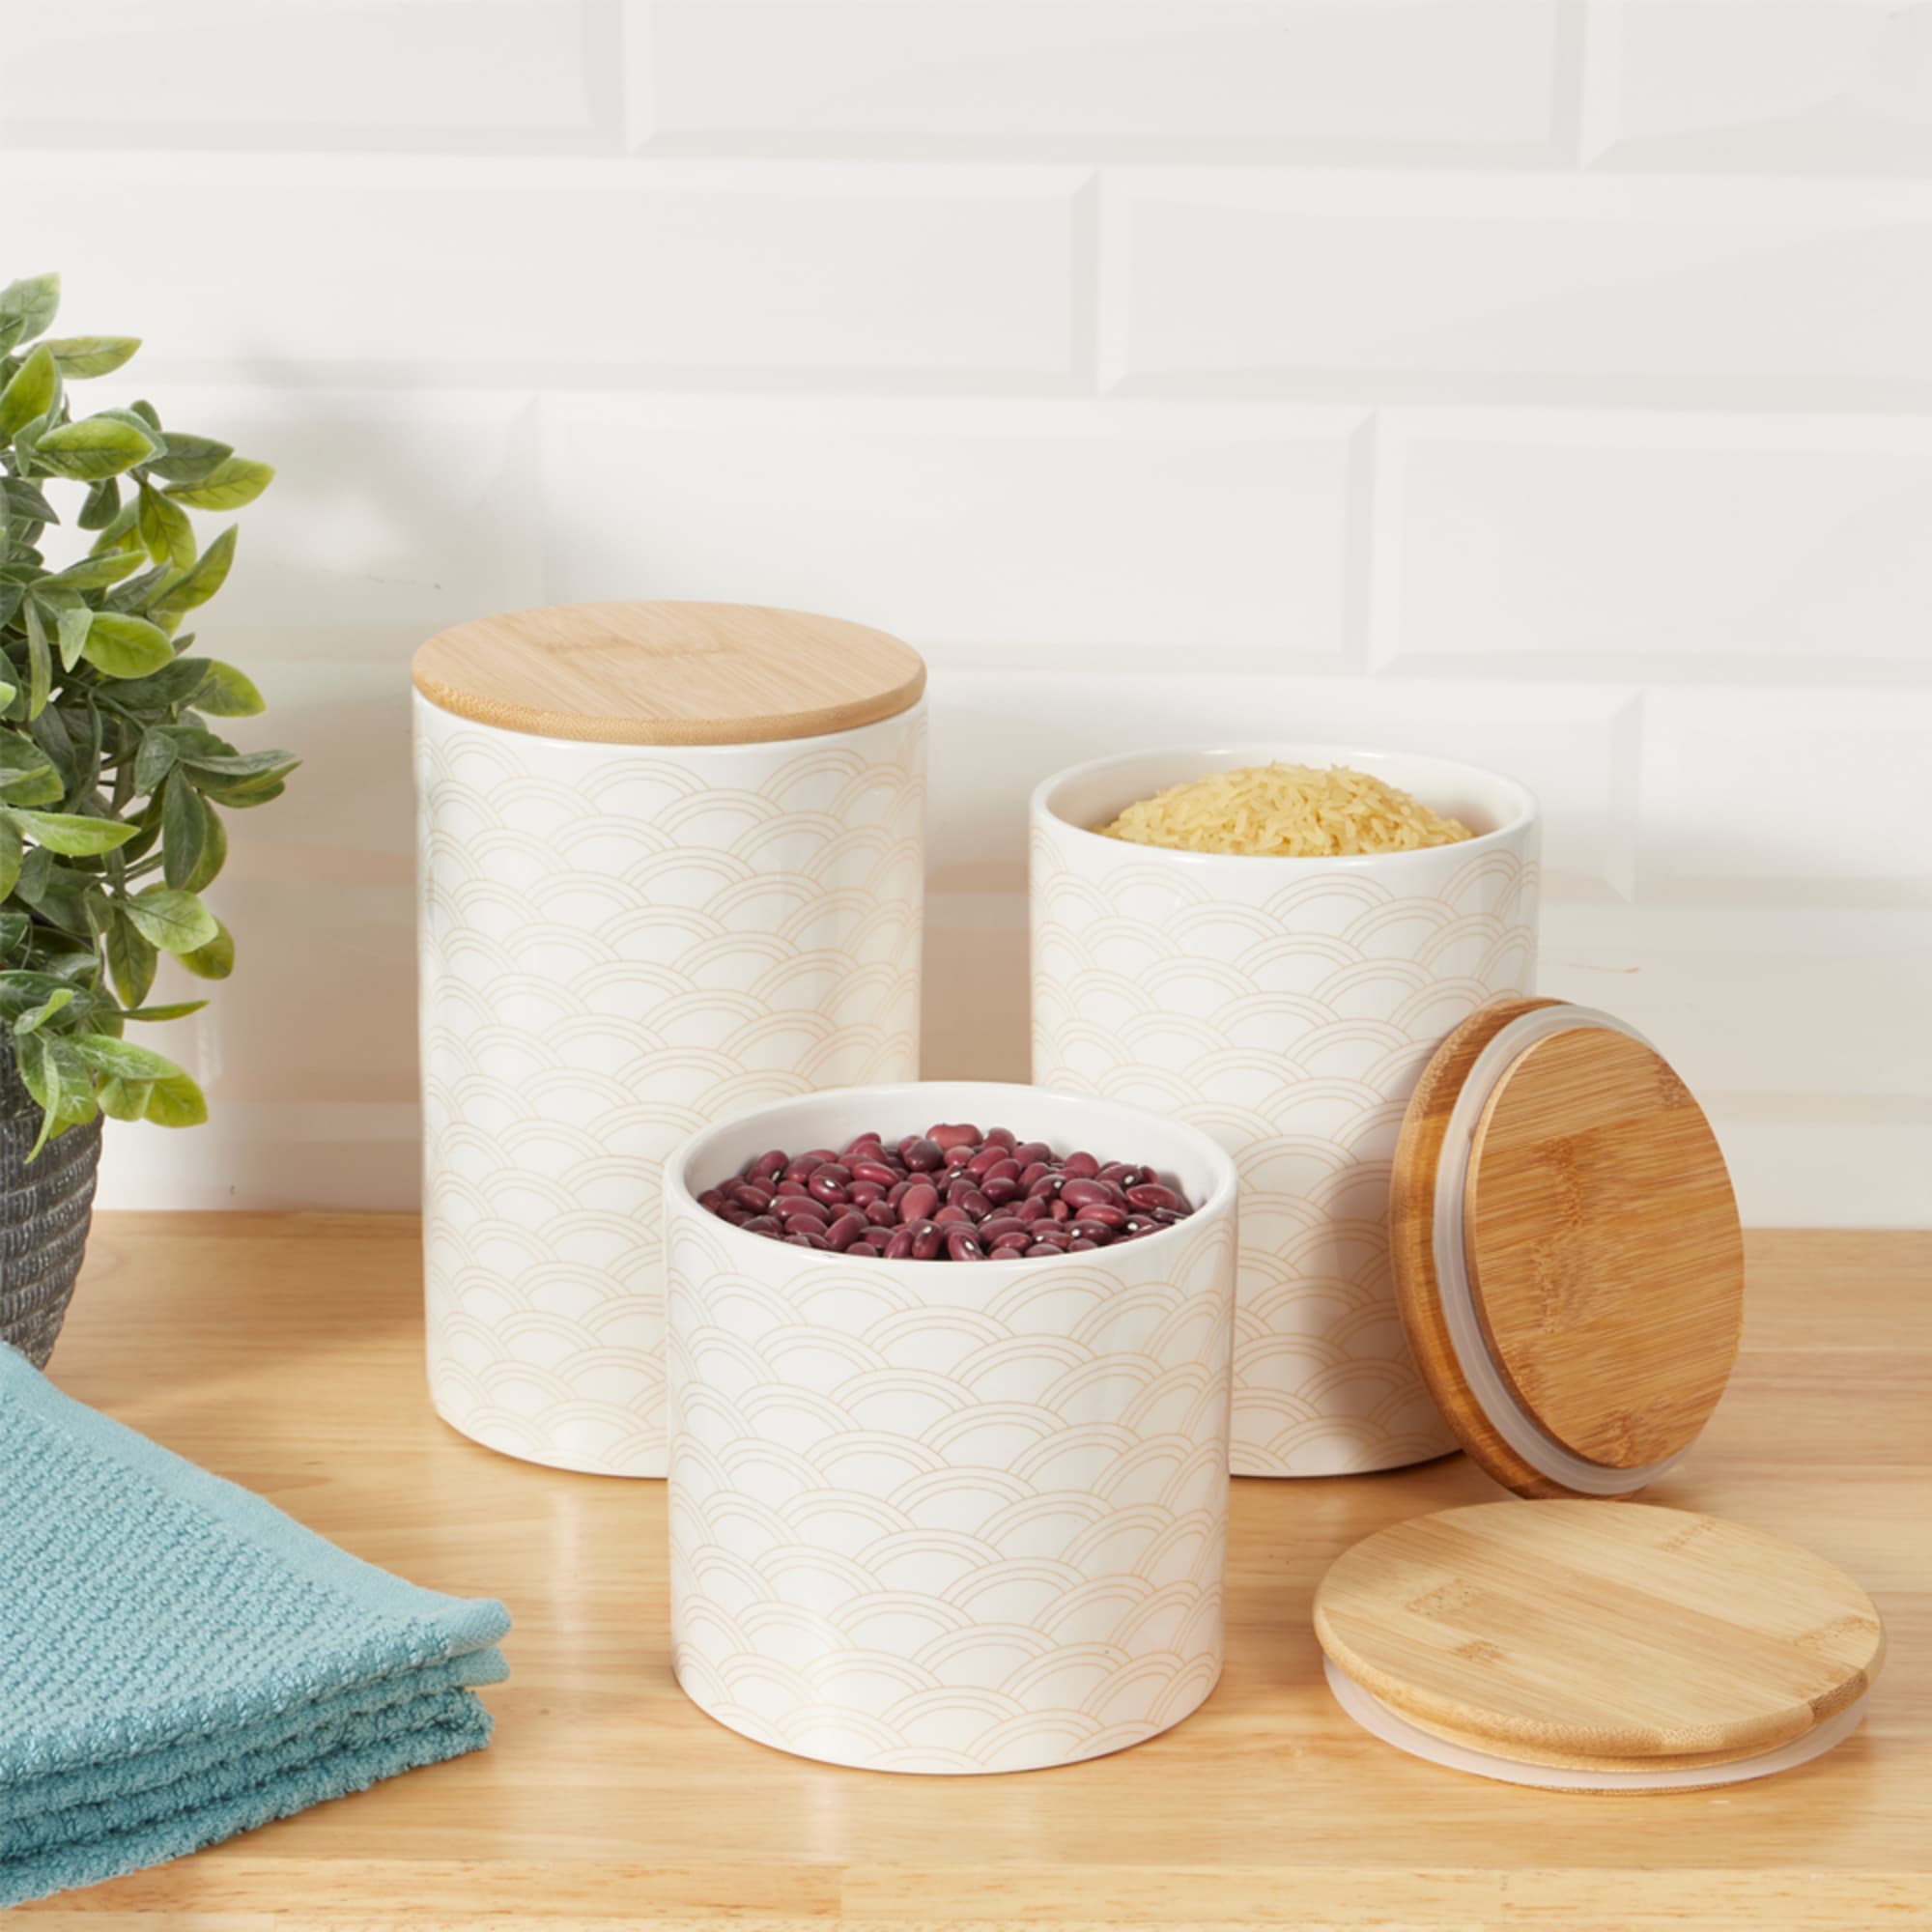 Home Basics Scallop 3 Piece Ceramic Canister Set With Bamboo Tops, White
 $20.00 EACH, CASE PACK OF 3